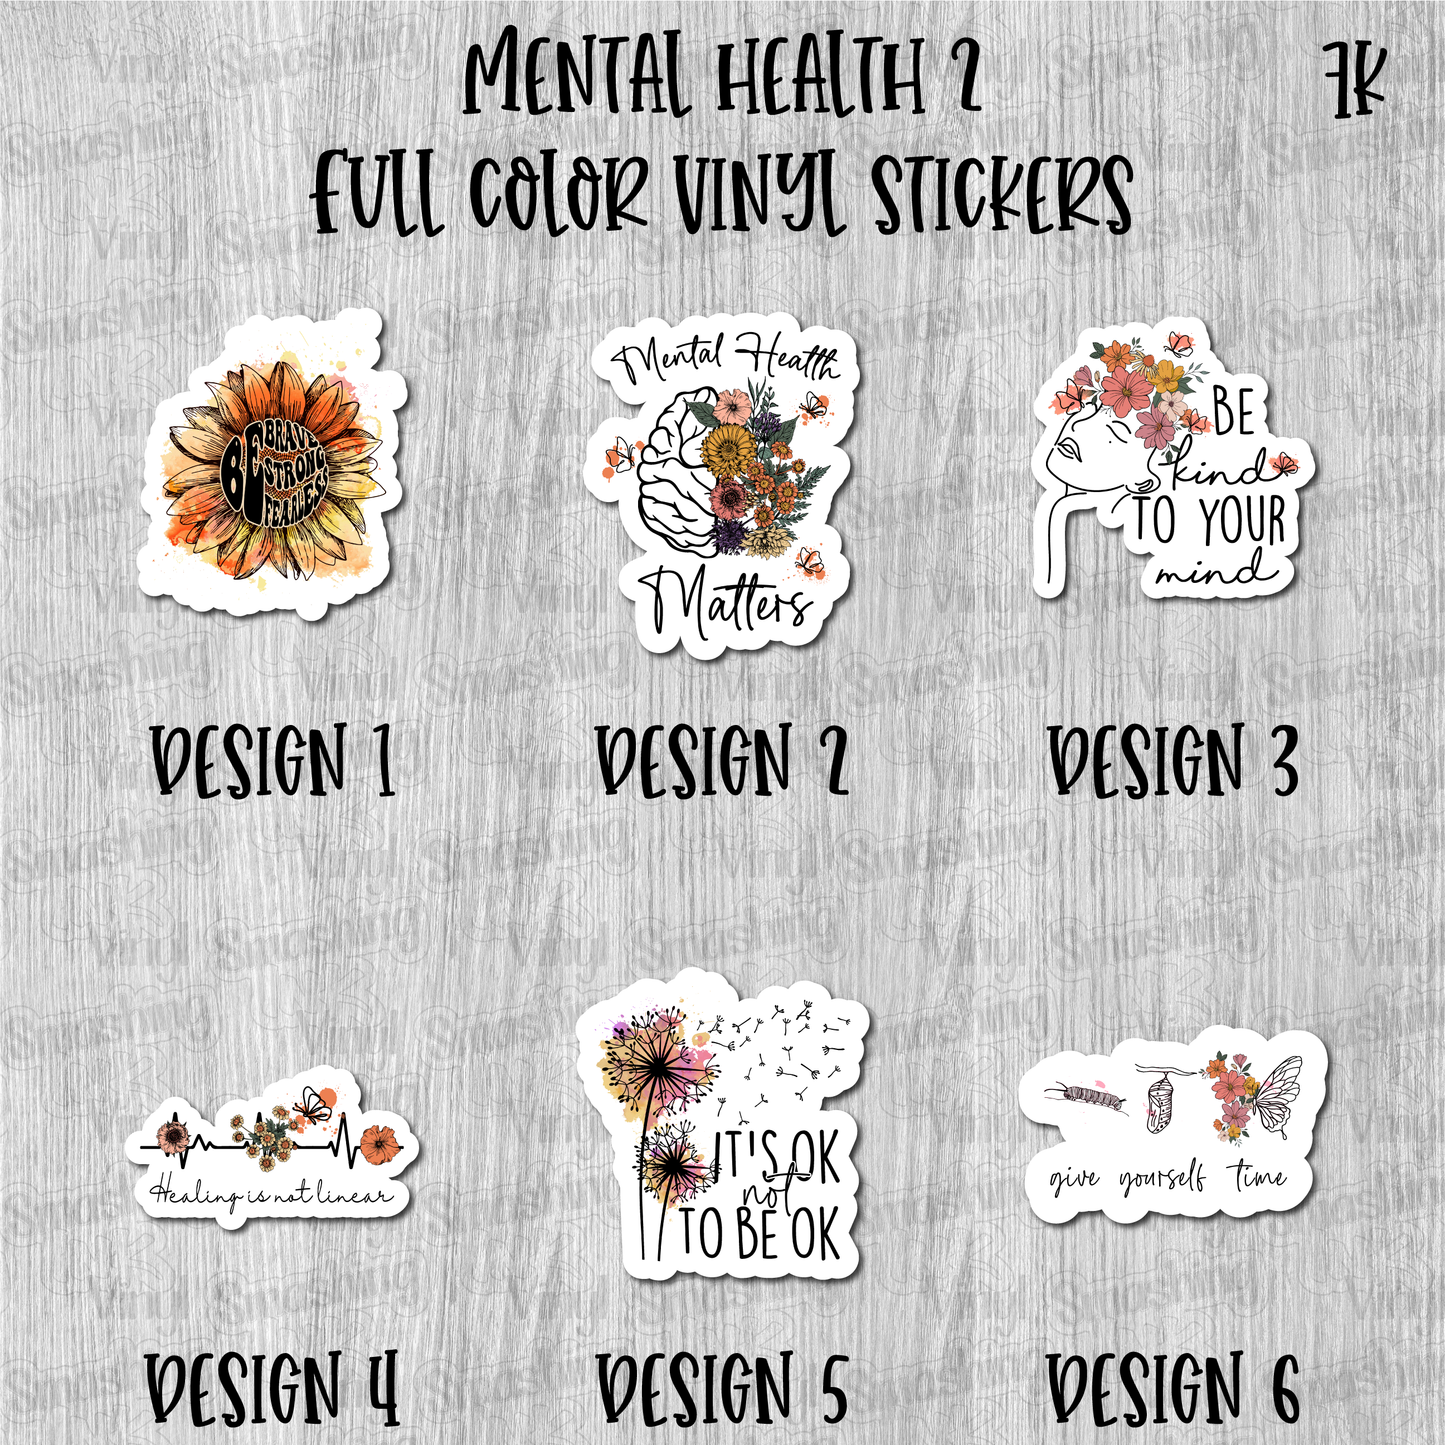 Mental Health 2 - Full Color Vinyl Stickers (SHIPS IN 3-7 BUS DAYS)